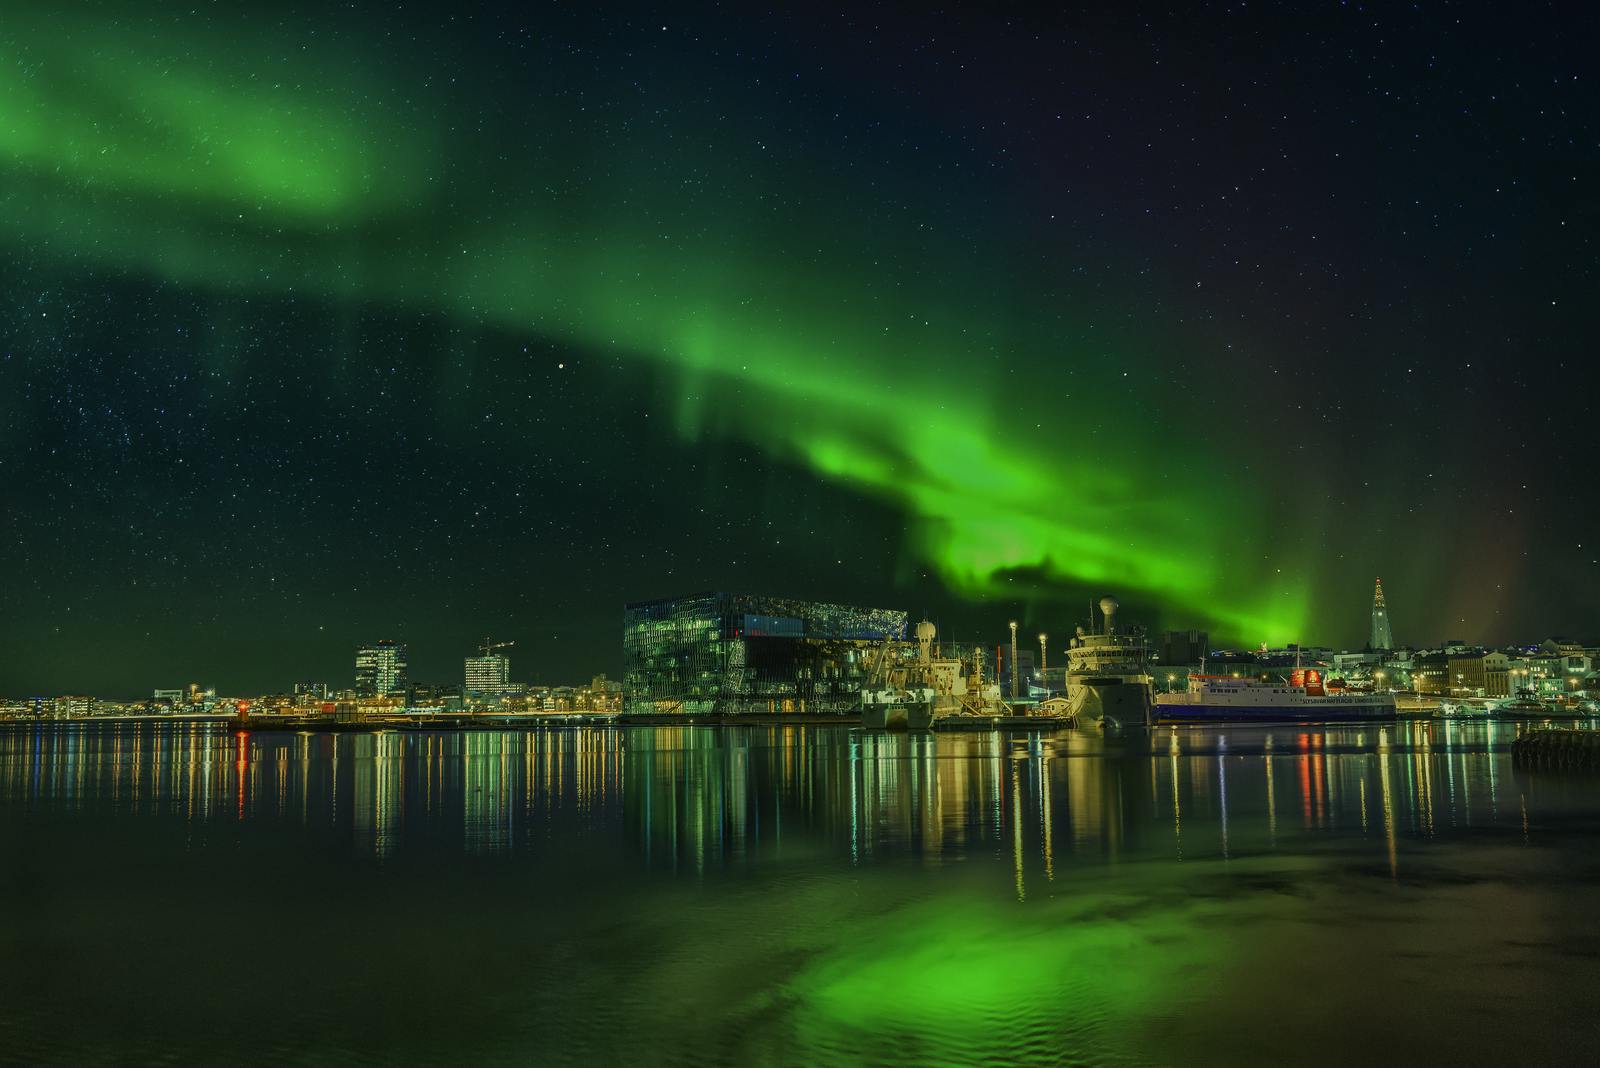 best time of year to visit iceland for northern lights